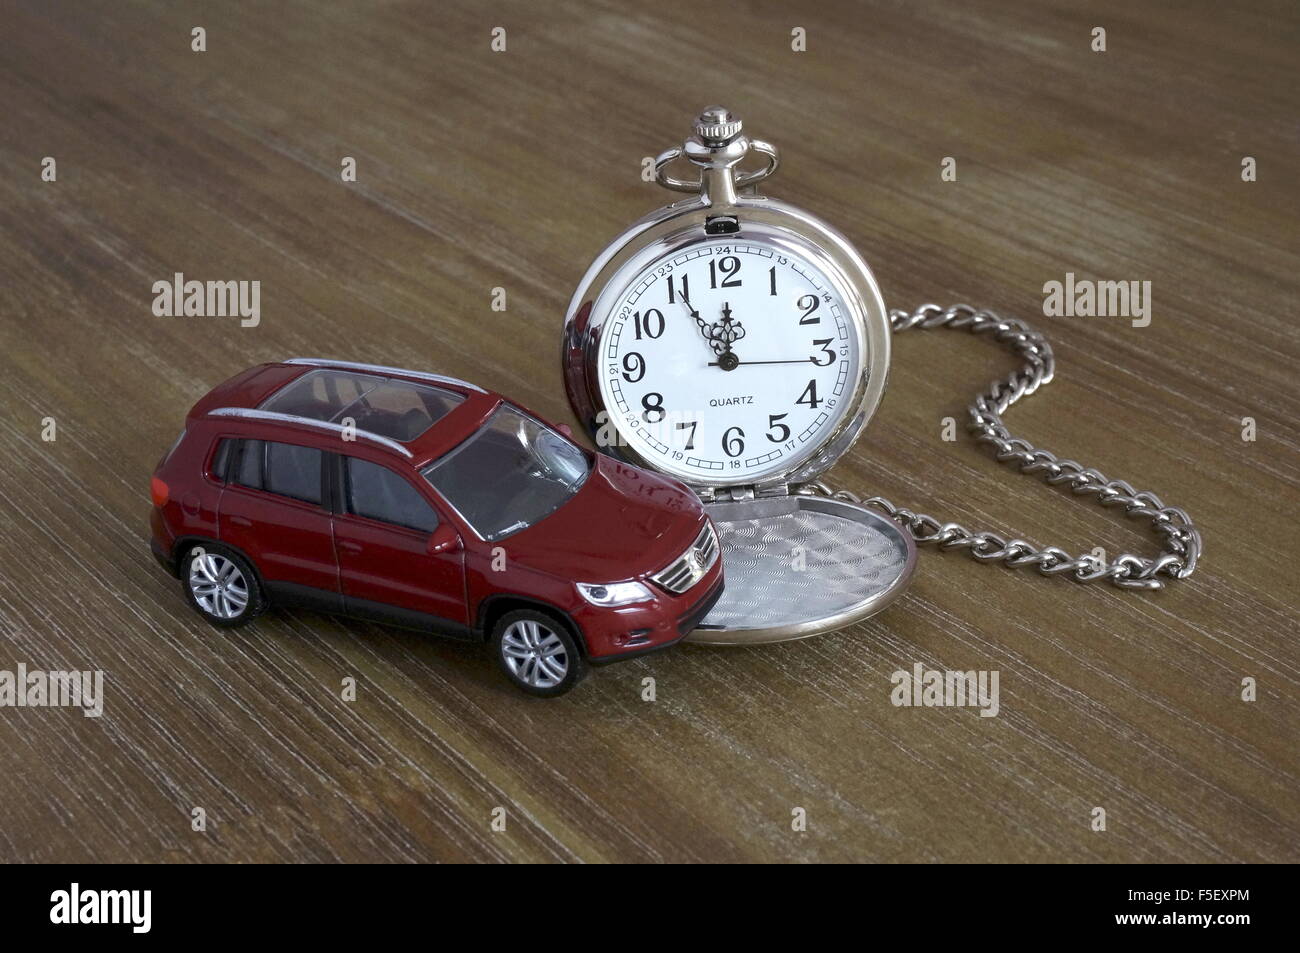 ILLUSTRATION - A Volkswagen car model 'VW Tiguan' next to a pocket watch. The photo was taken on 15 October 2015. Photo: S. Steinach - NO WIRE SERVICE - Stock Photo